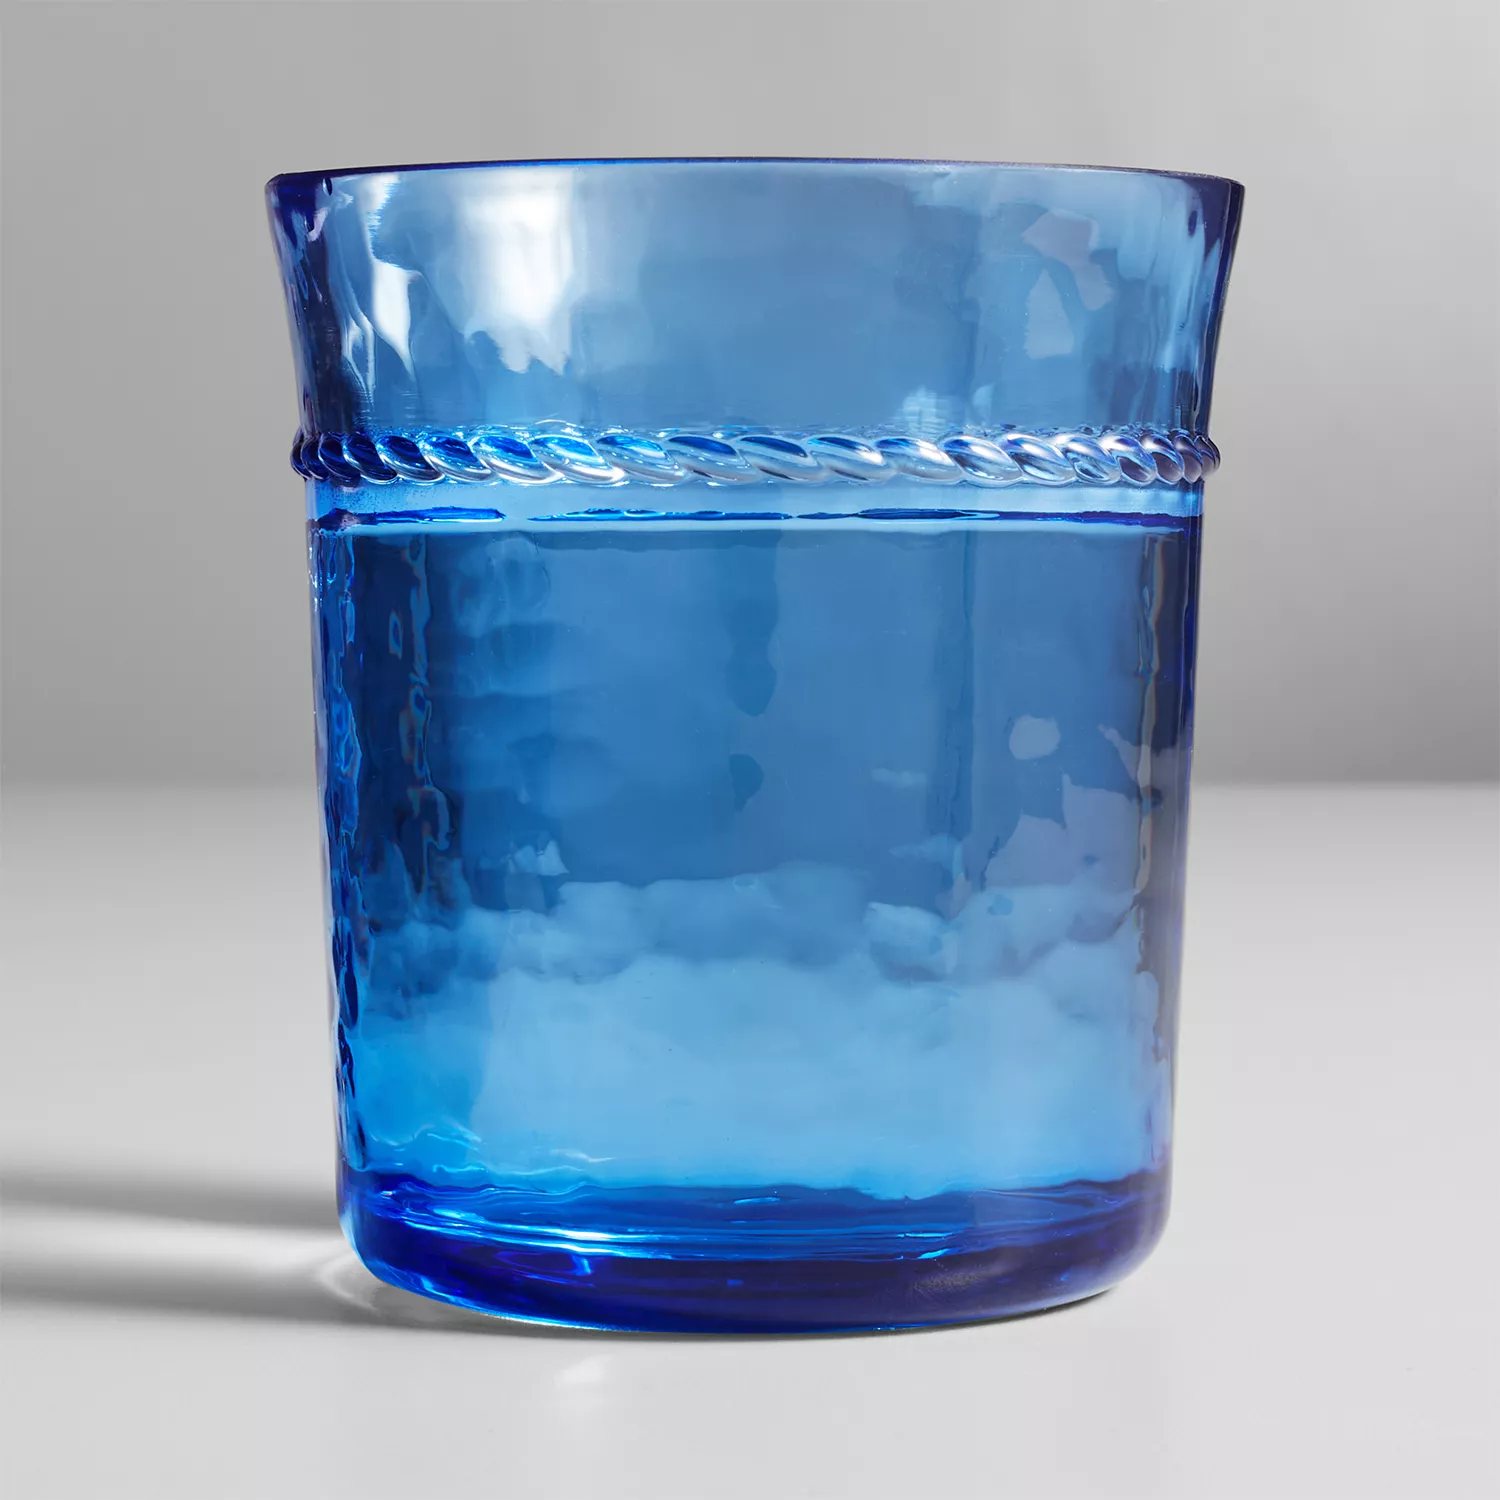 Sur La Table Blue Rope Double Old-Fashion Outdoor Glass